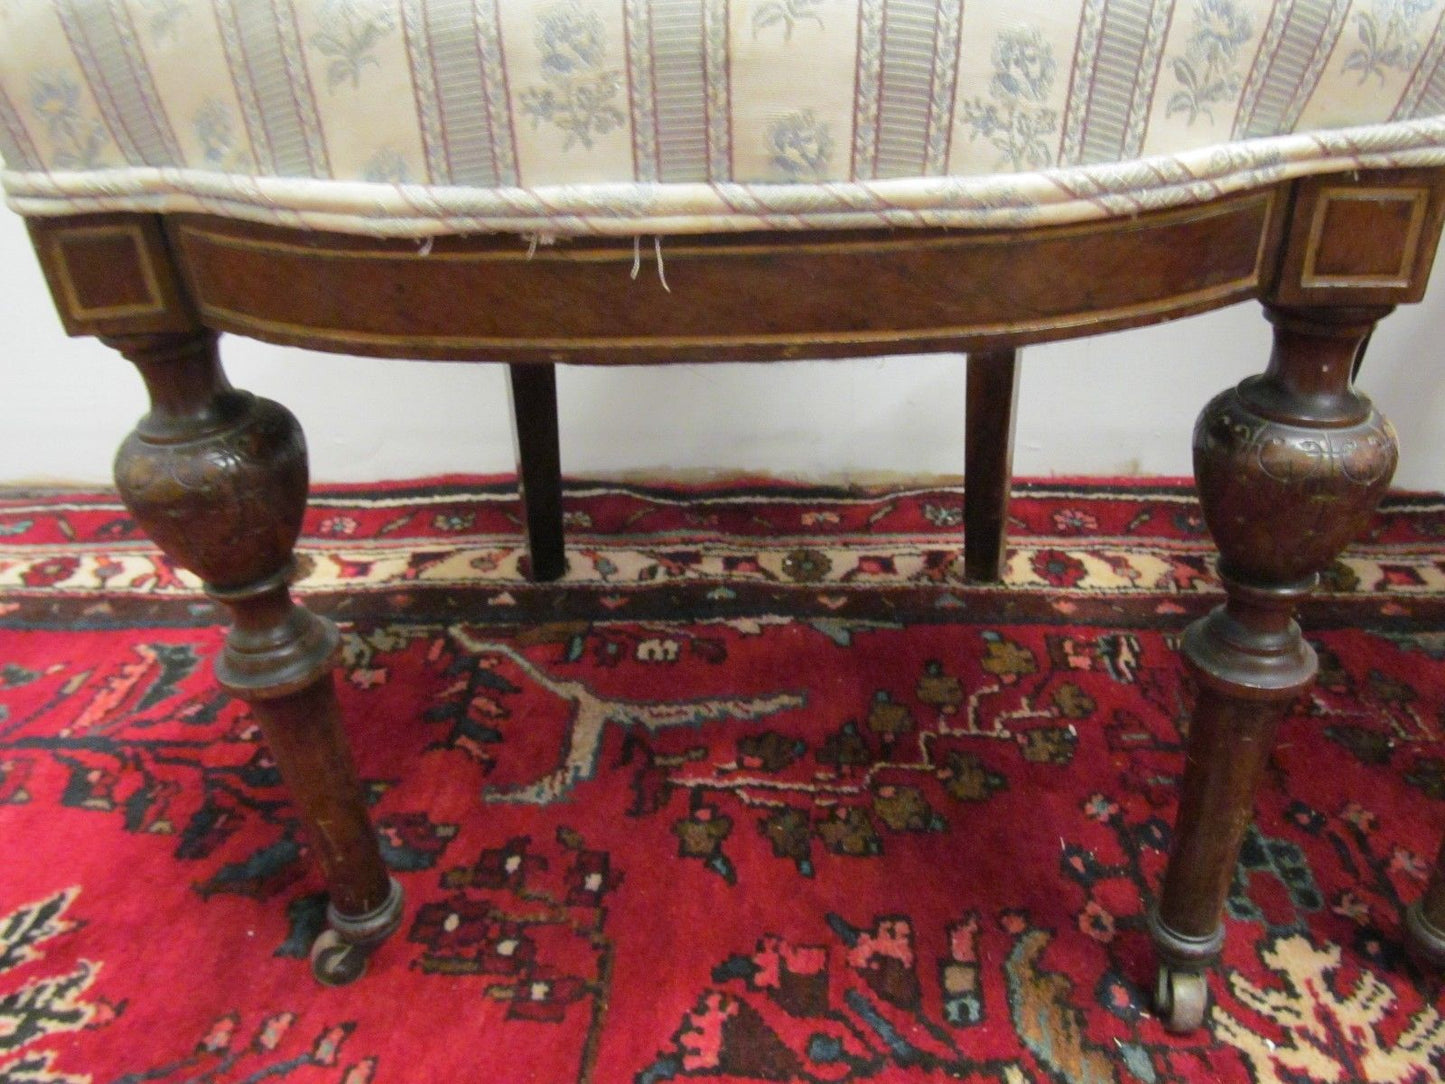 PAIR OF VICTORIAN WALNUT PARLOR CHAIRS WITH FINELY CARVED BACK SPLATS